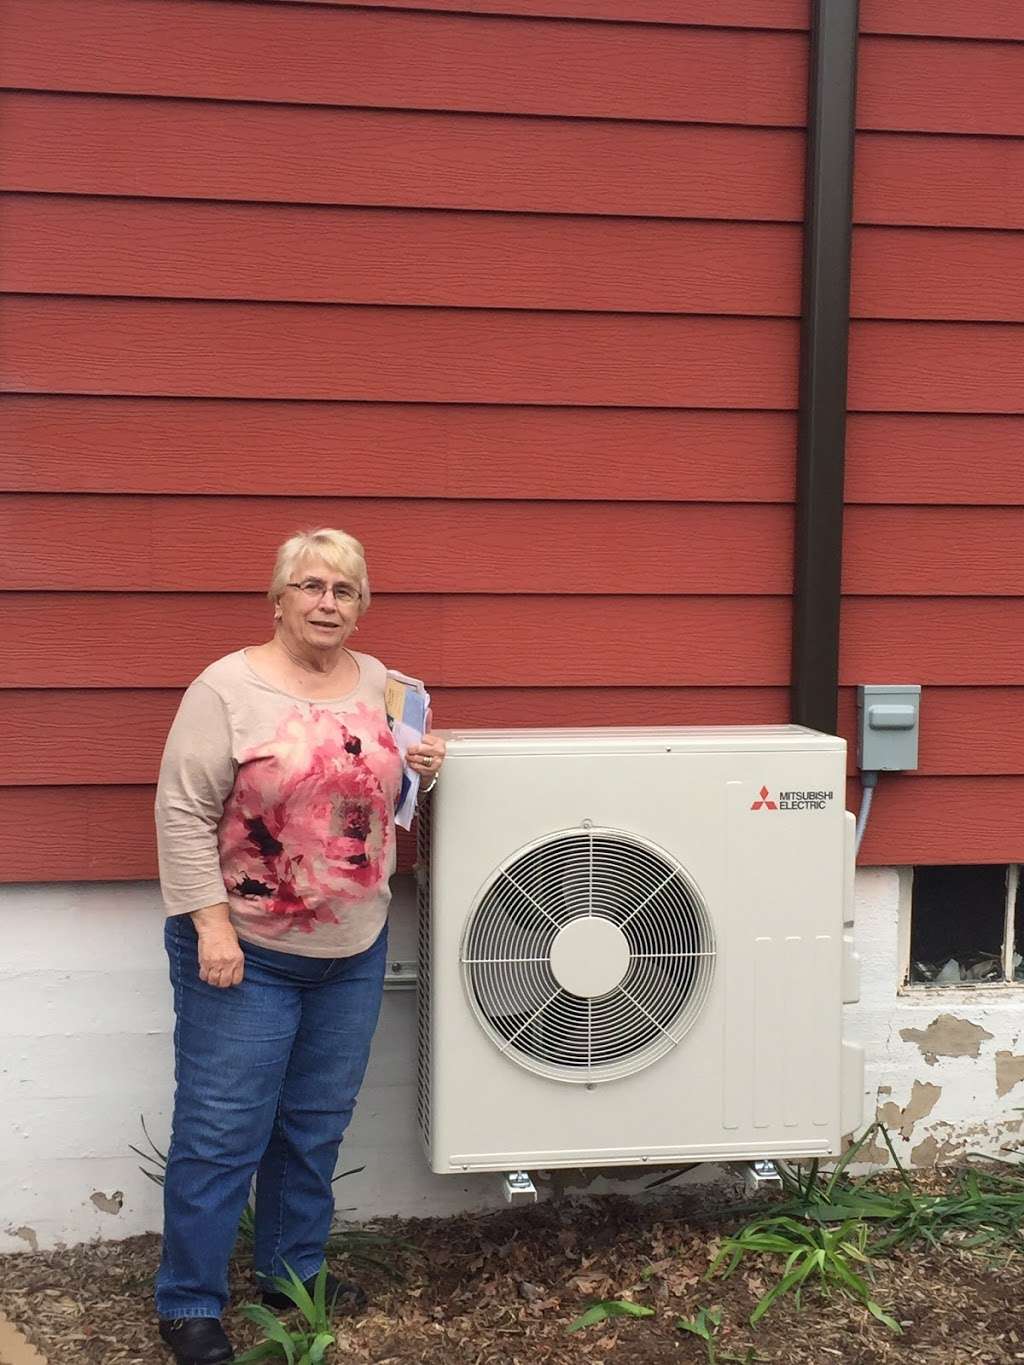 McCullions Air Conditioning, Heating and Electrical | 119 S 9th St, Lehighton, PA 18235 | Phone: (610) 377-3713